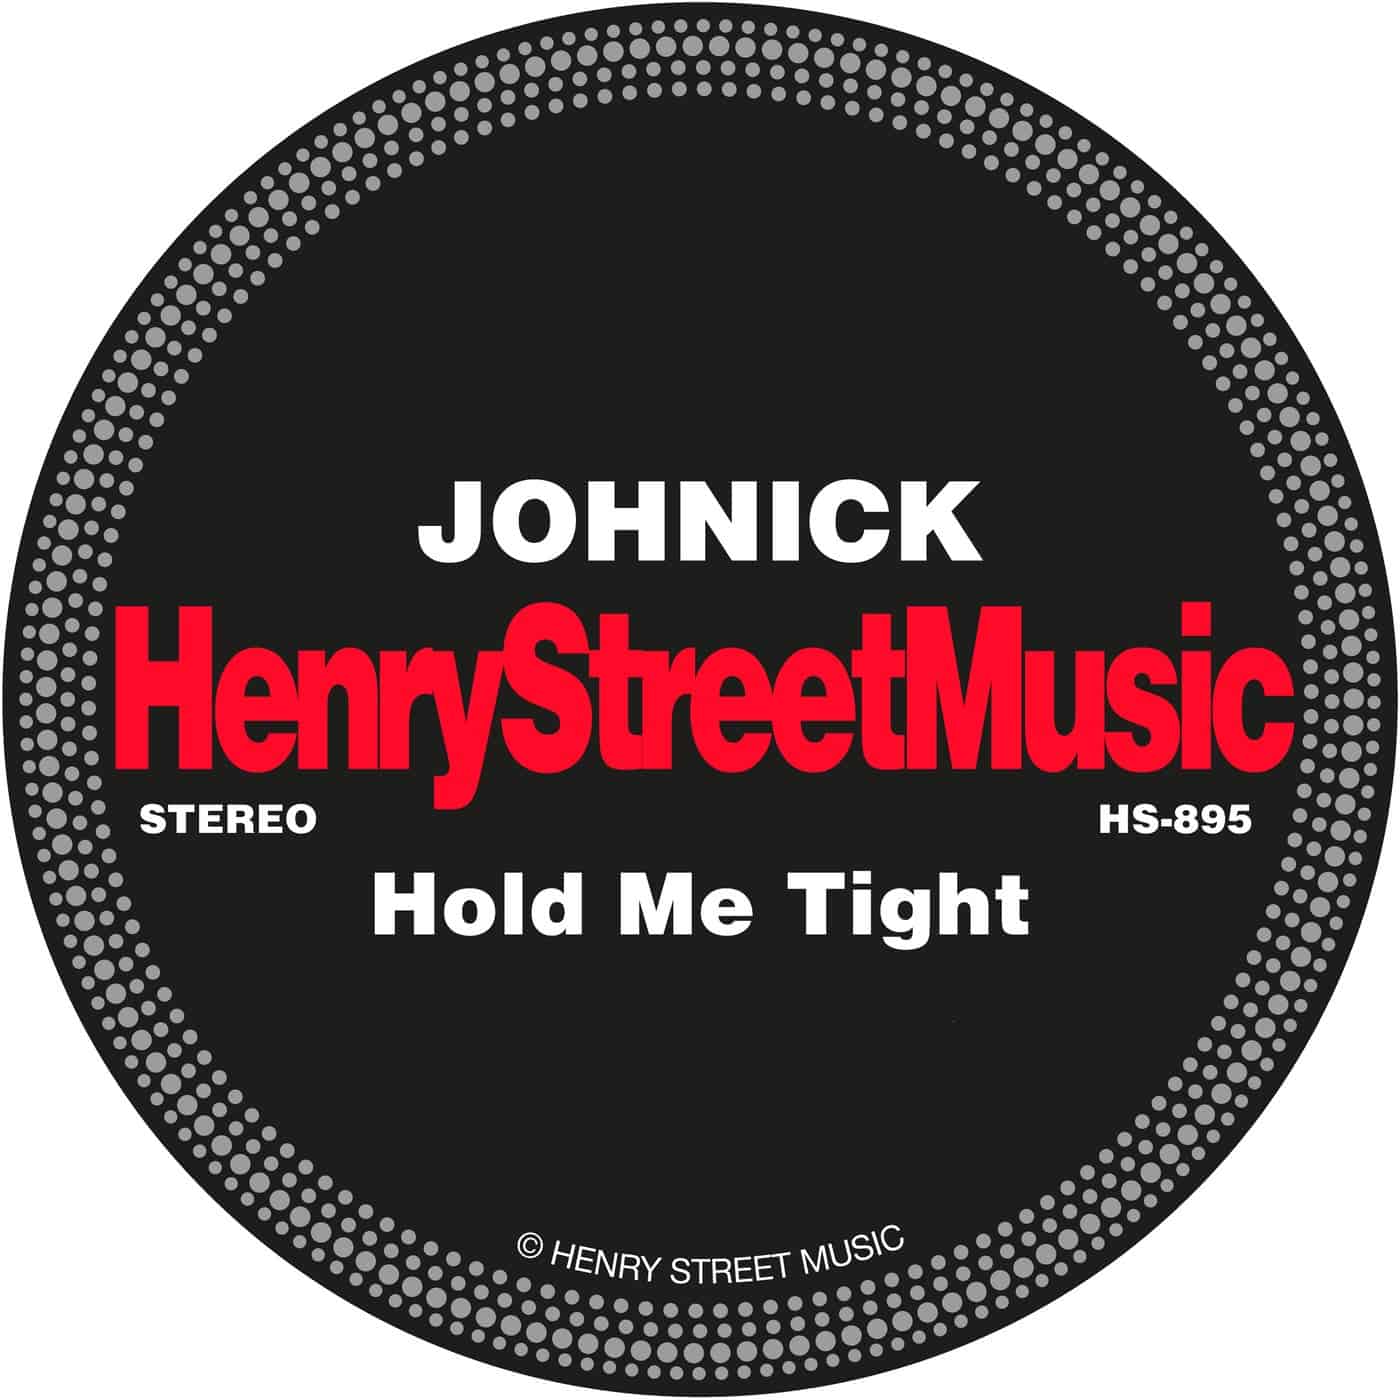 image cover: Johnick - Hold Me Tight / HS895